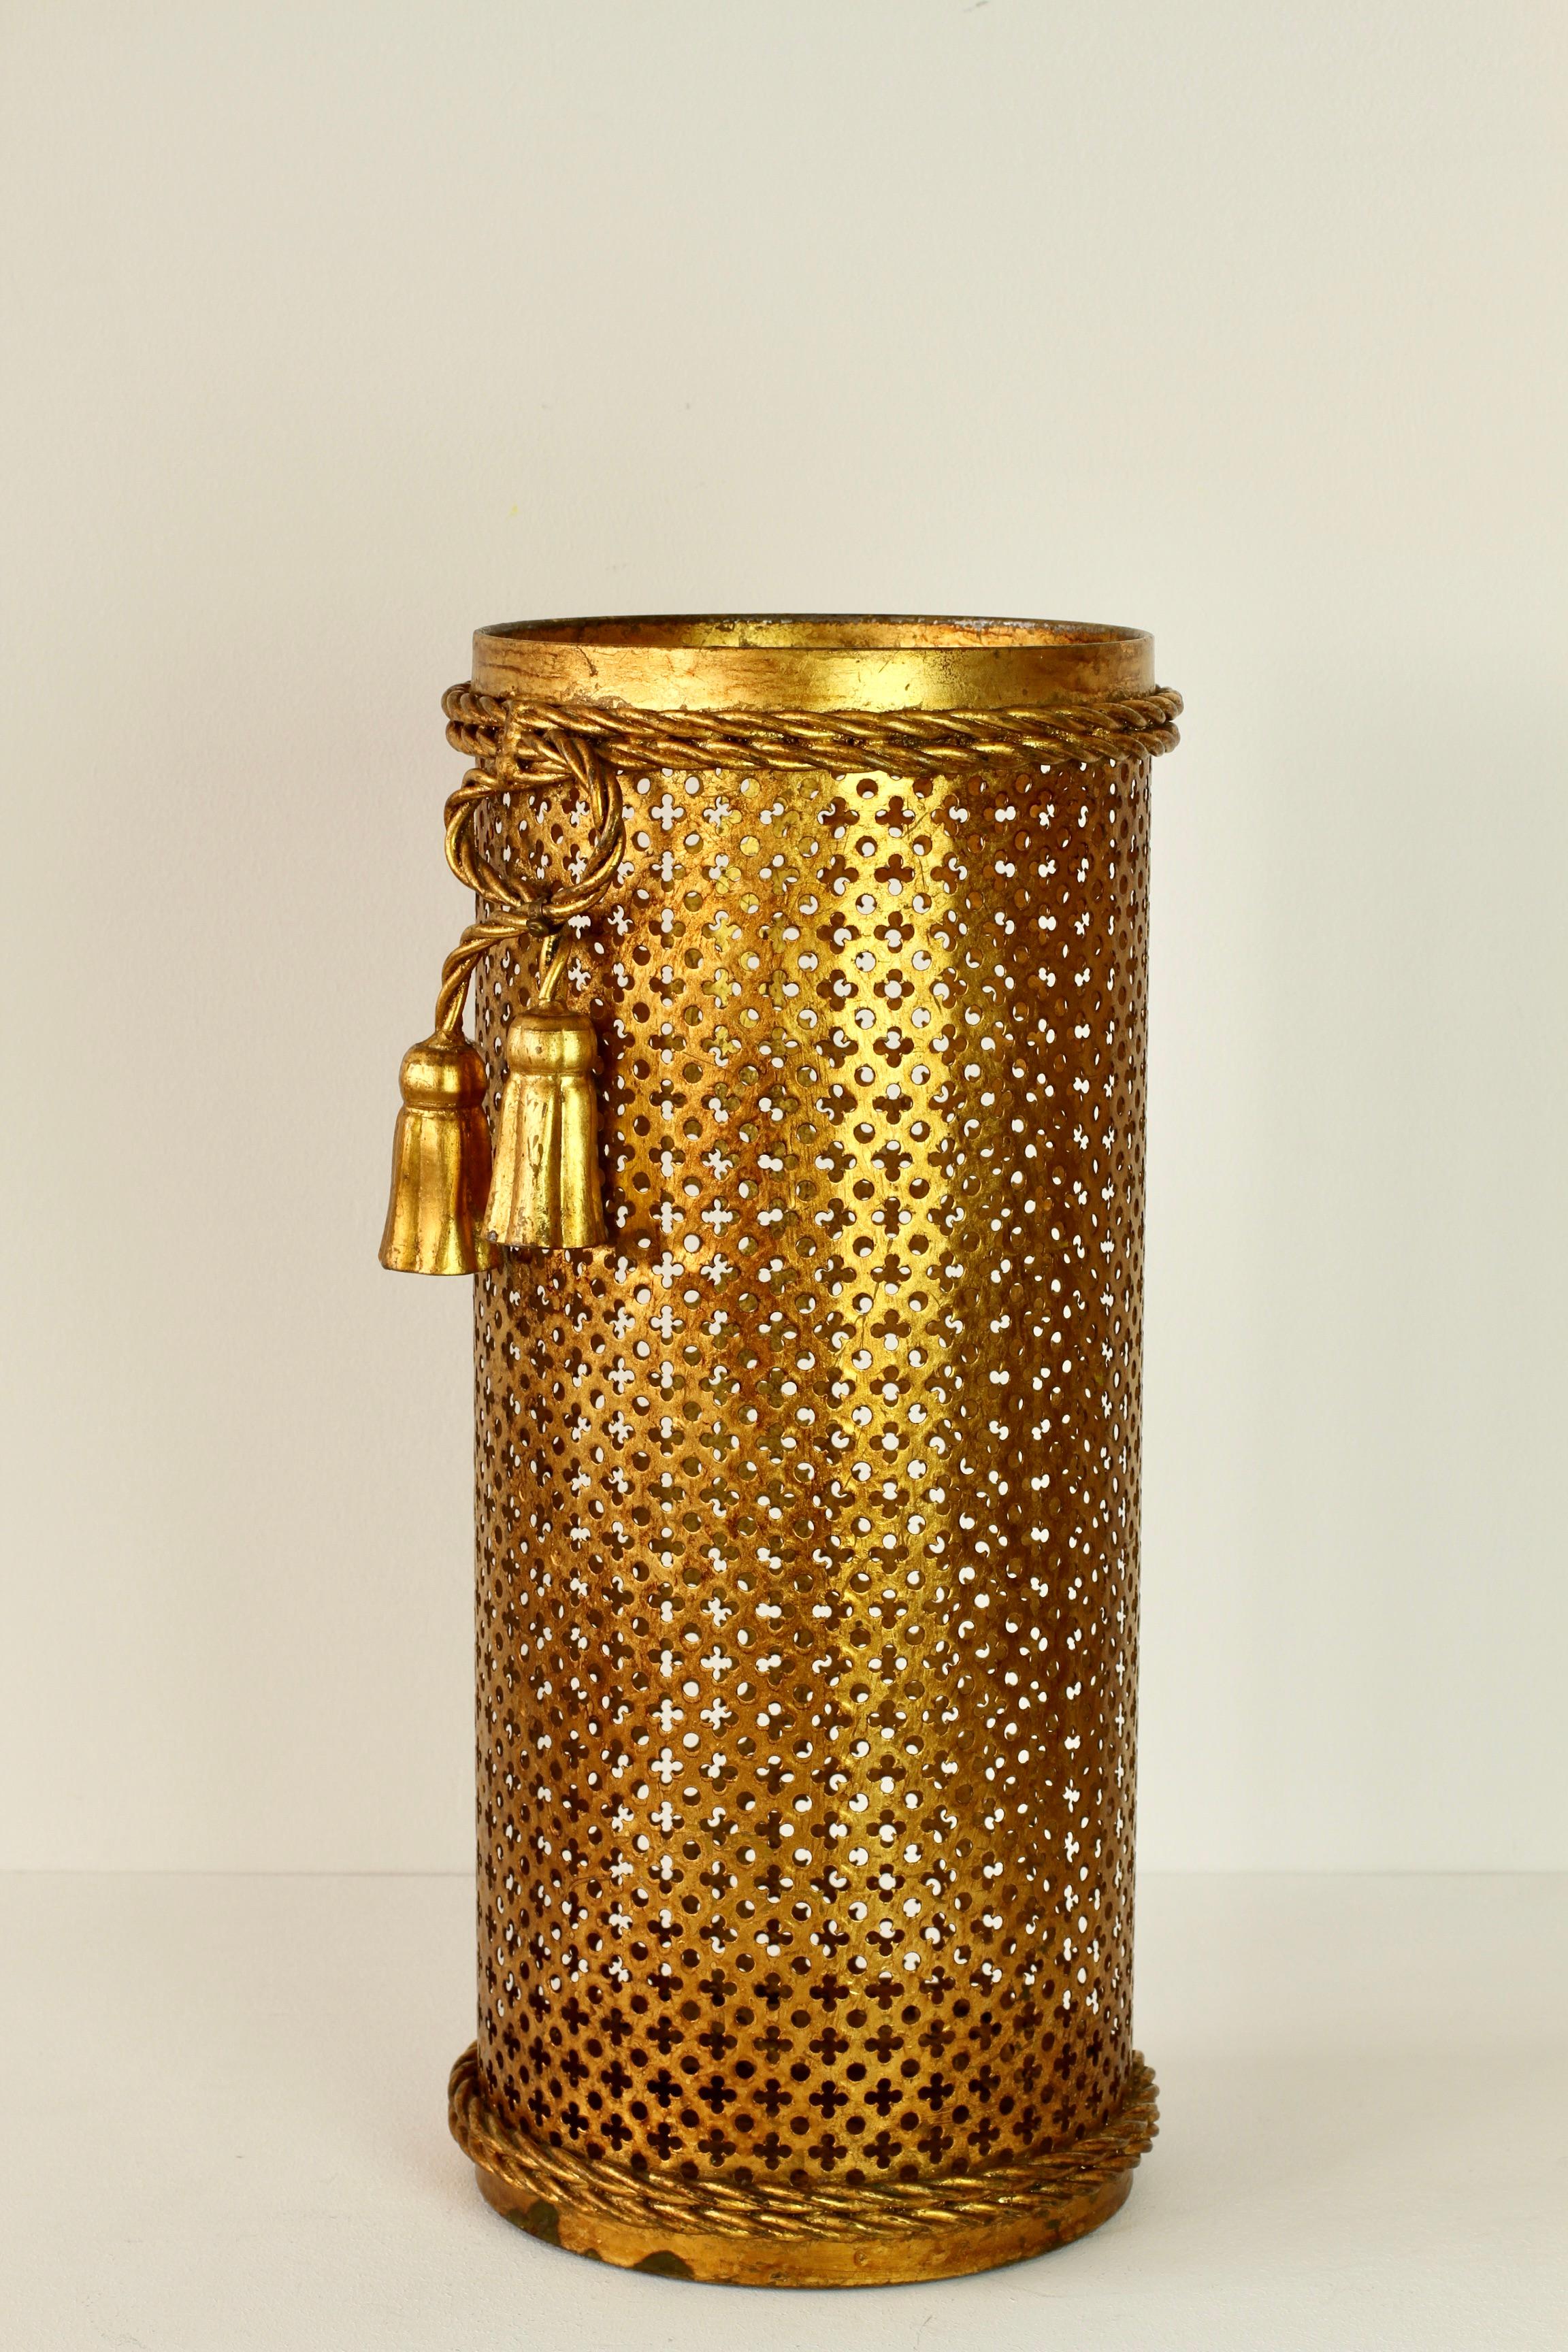 Midcentury Italian Hollywood Regency Gold Gilded Umbrella Stand or Holder, 1950s For Sale 5